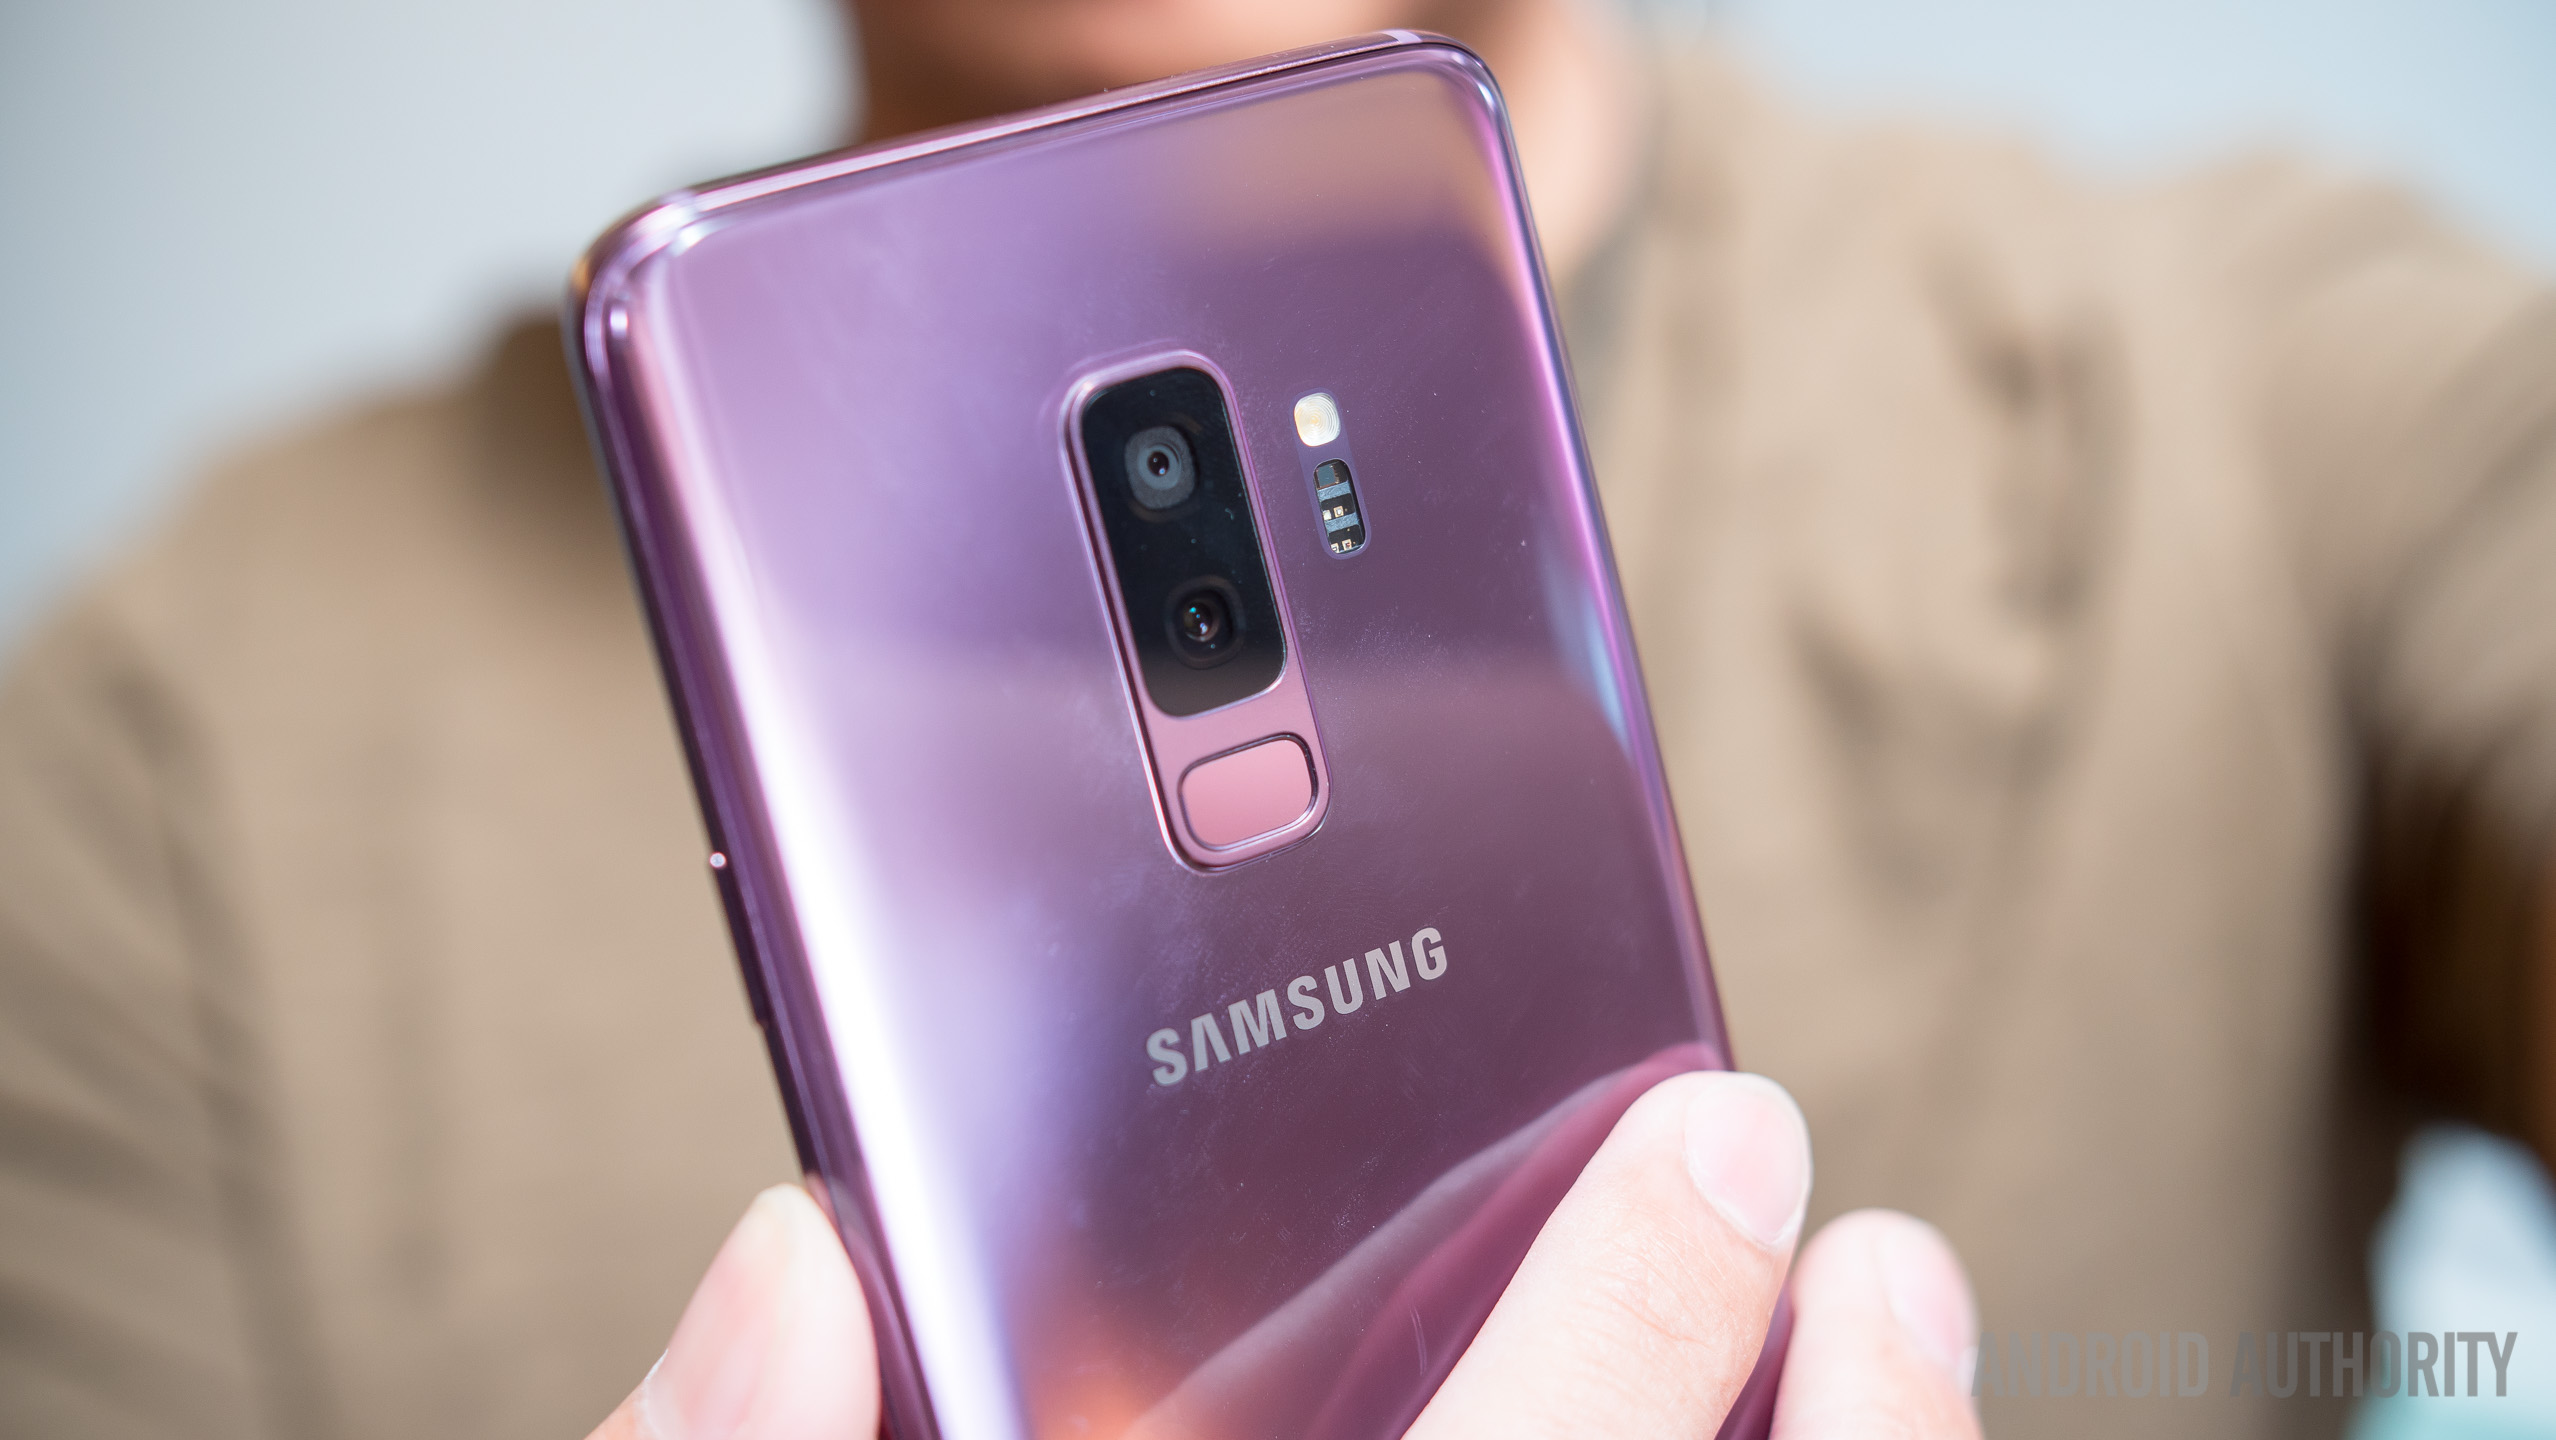 Ant Geometry footsteps Samsung Galaxy S9 review: Follow the leader